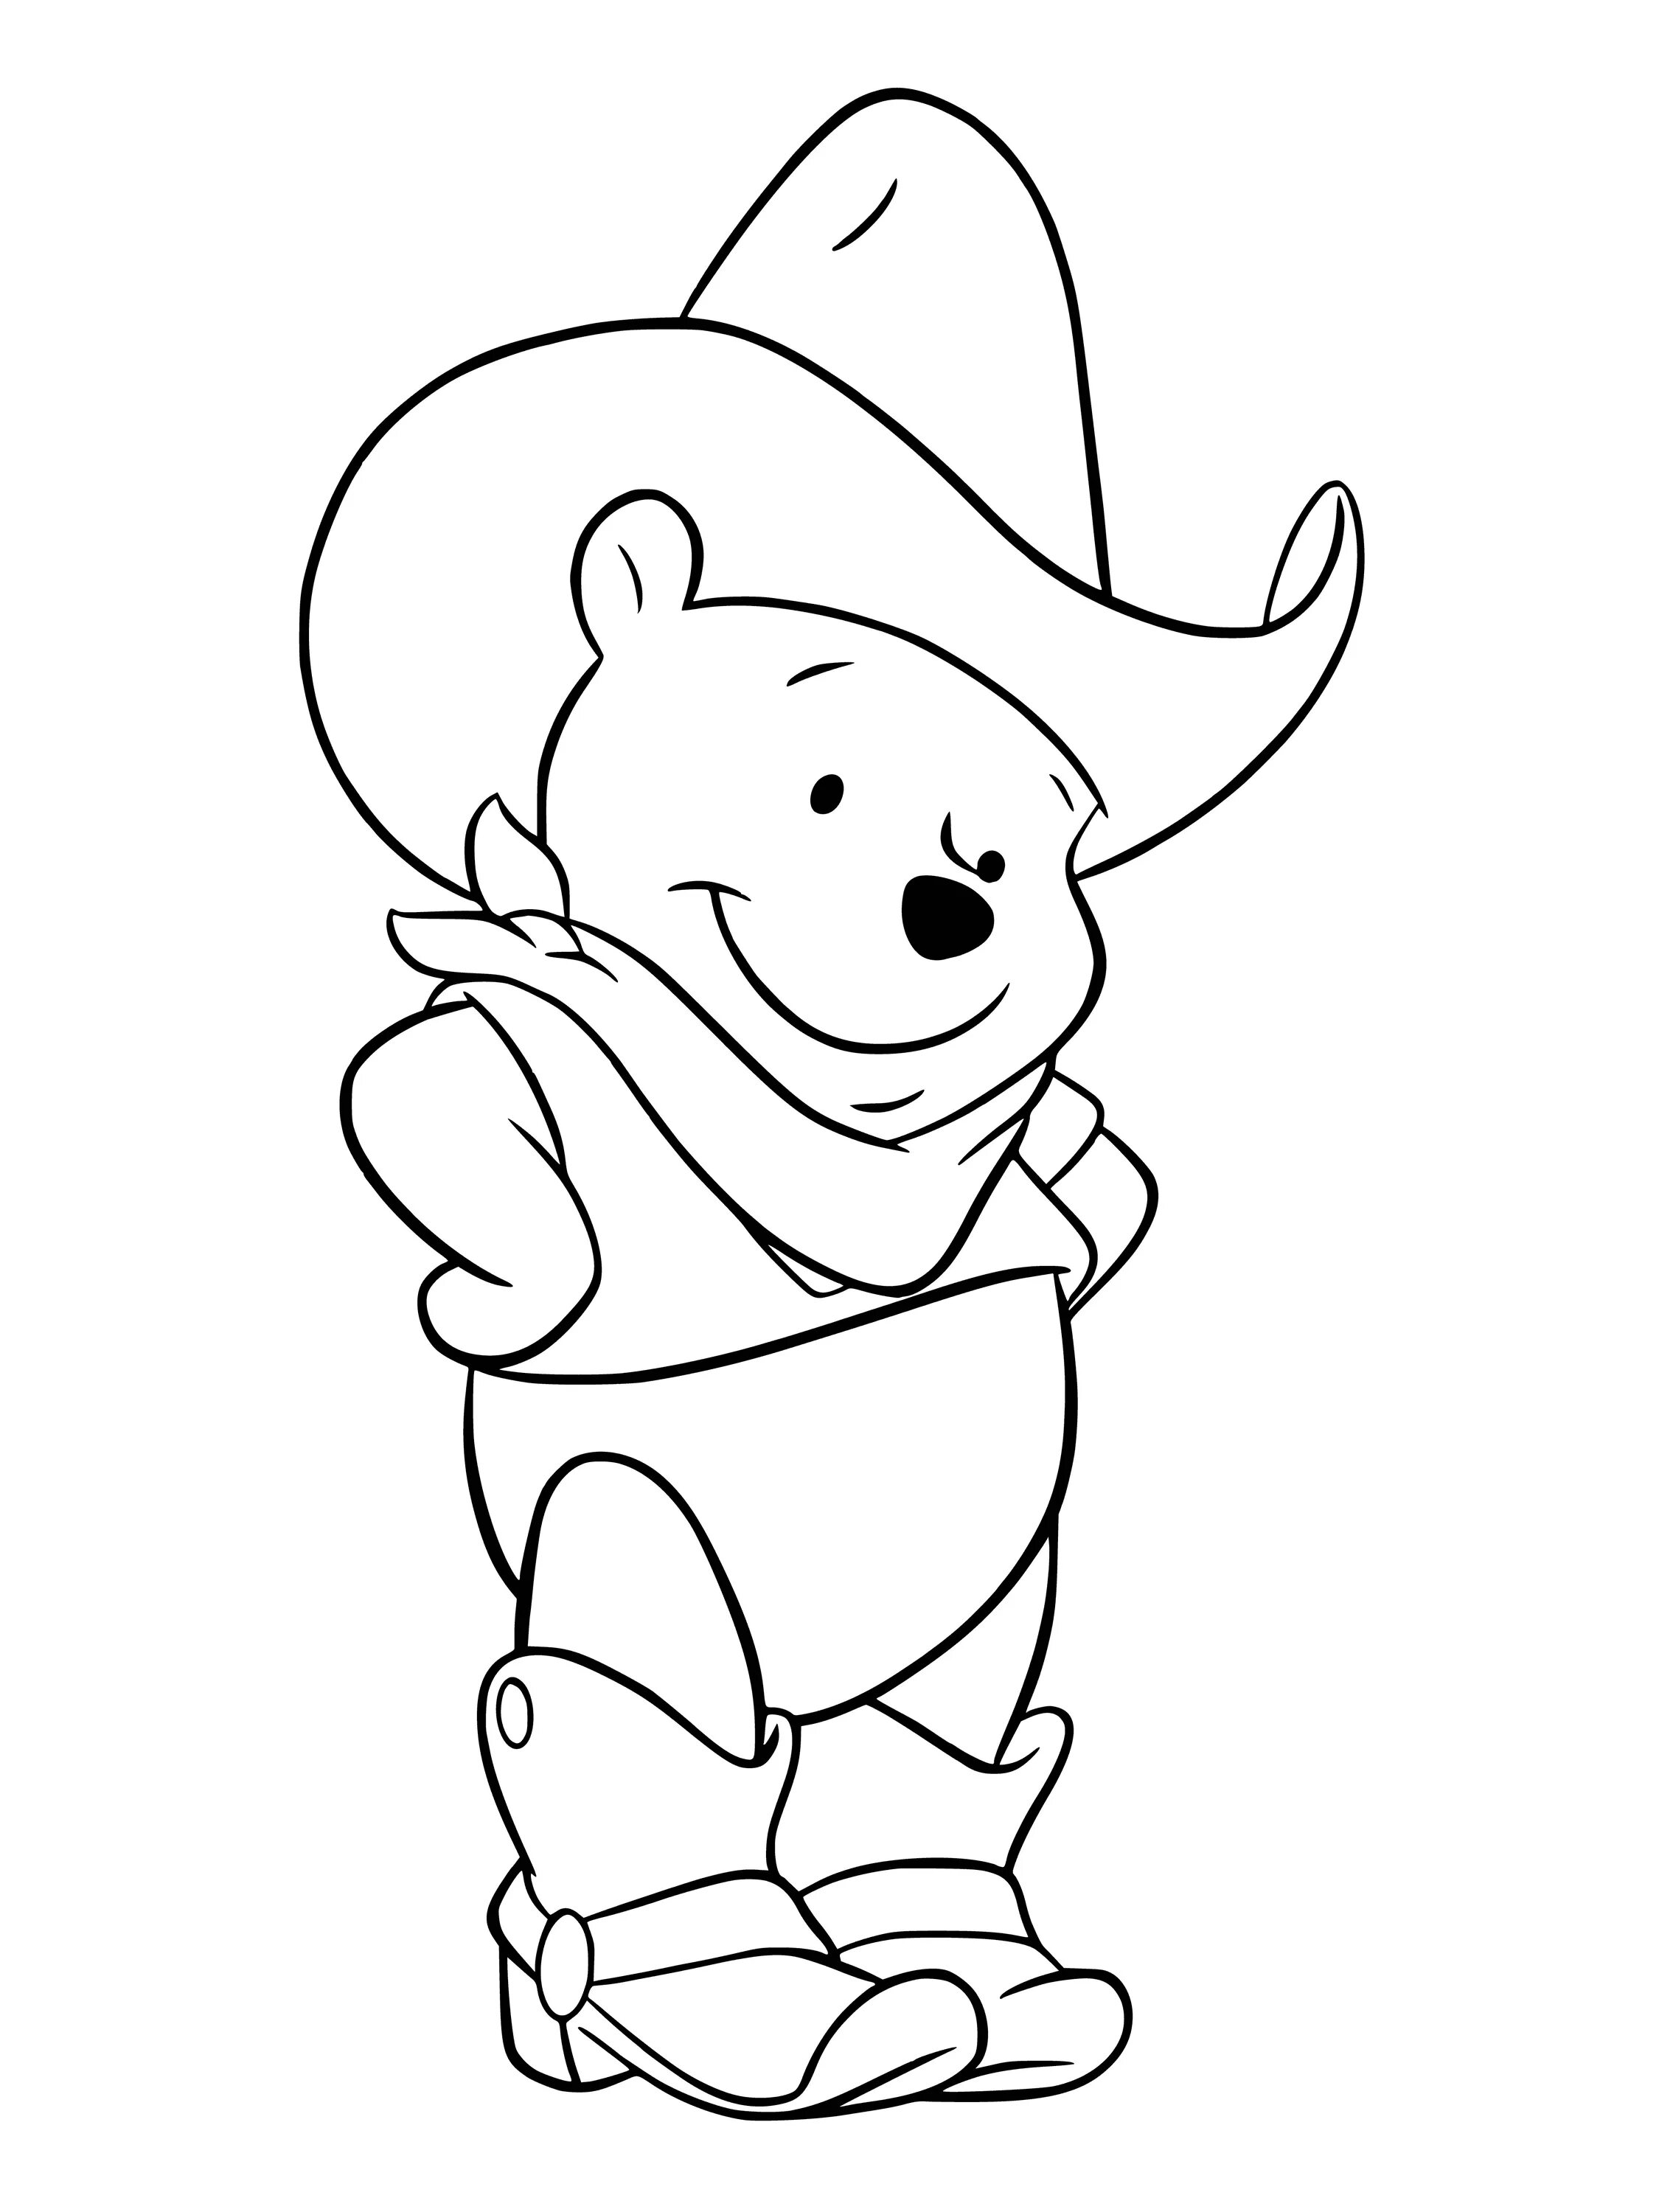 Disney-friendly coloring pages